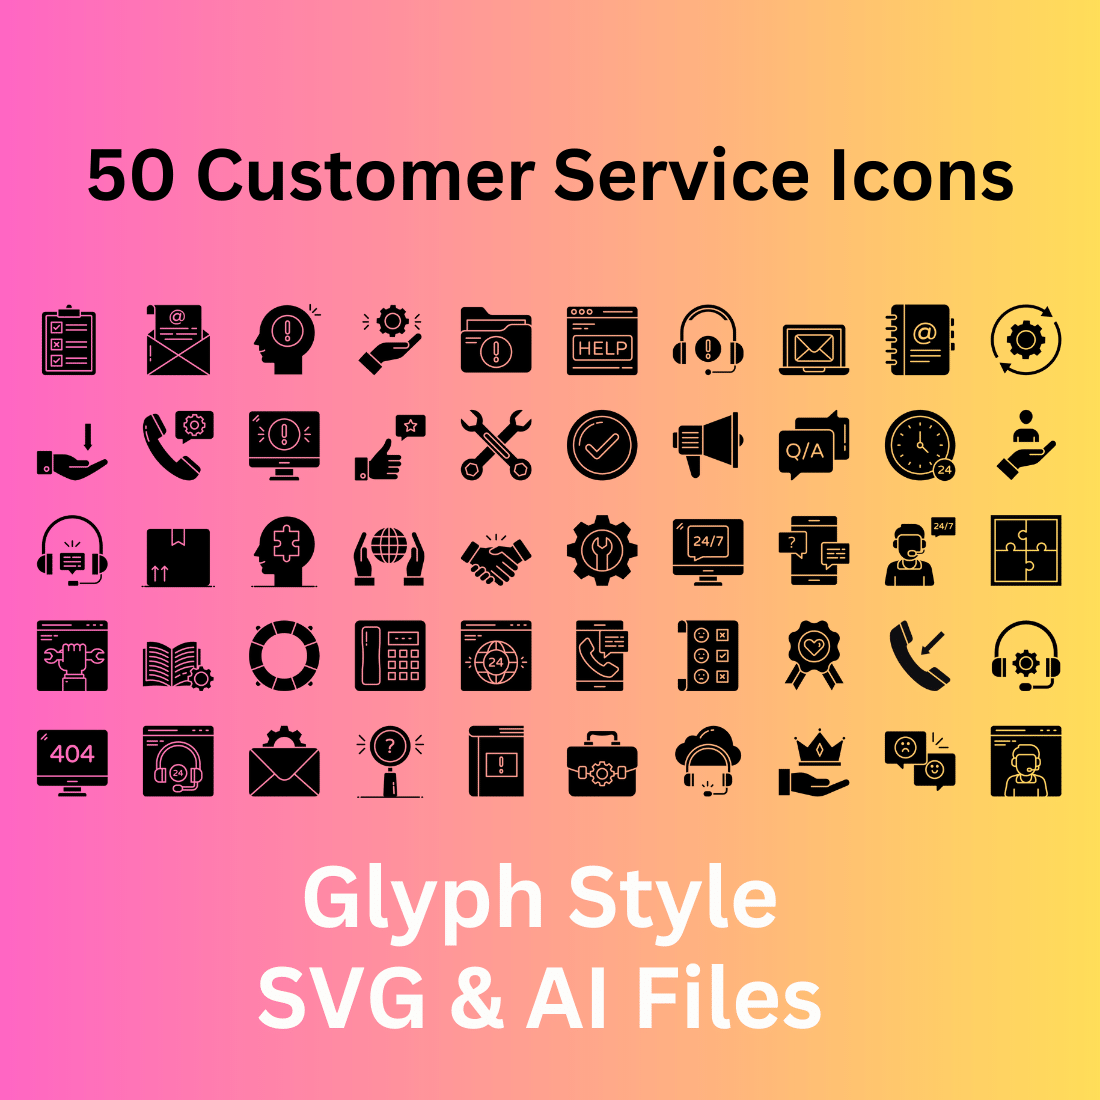 Customer Service Icon Set 50 Glyph Icons - SVG And AI Files cover image.